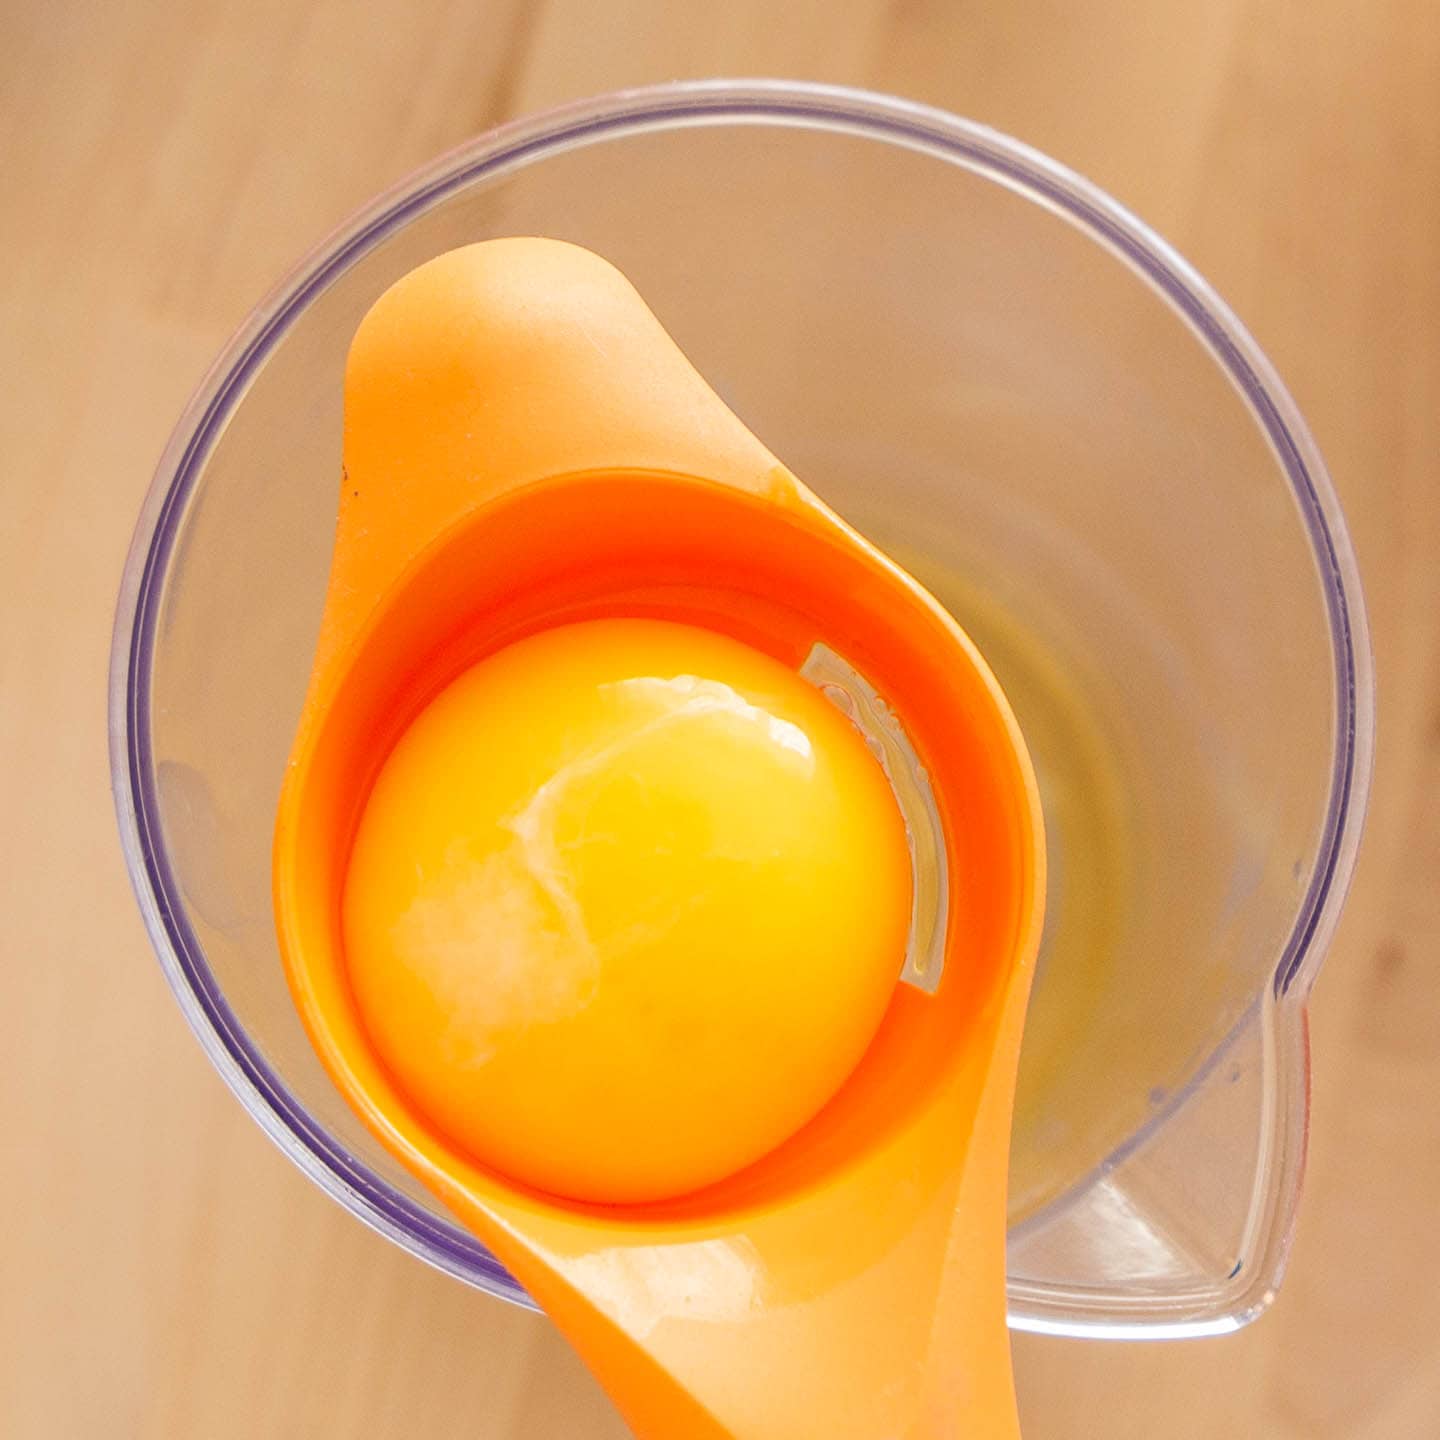 Egg being separated with an egg separator